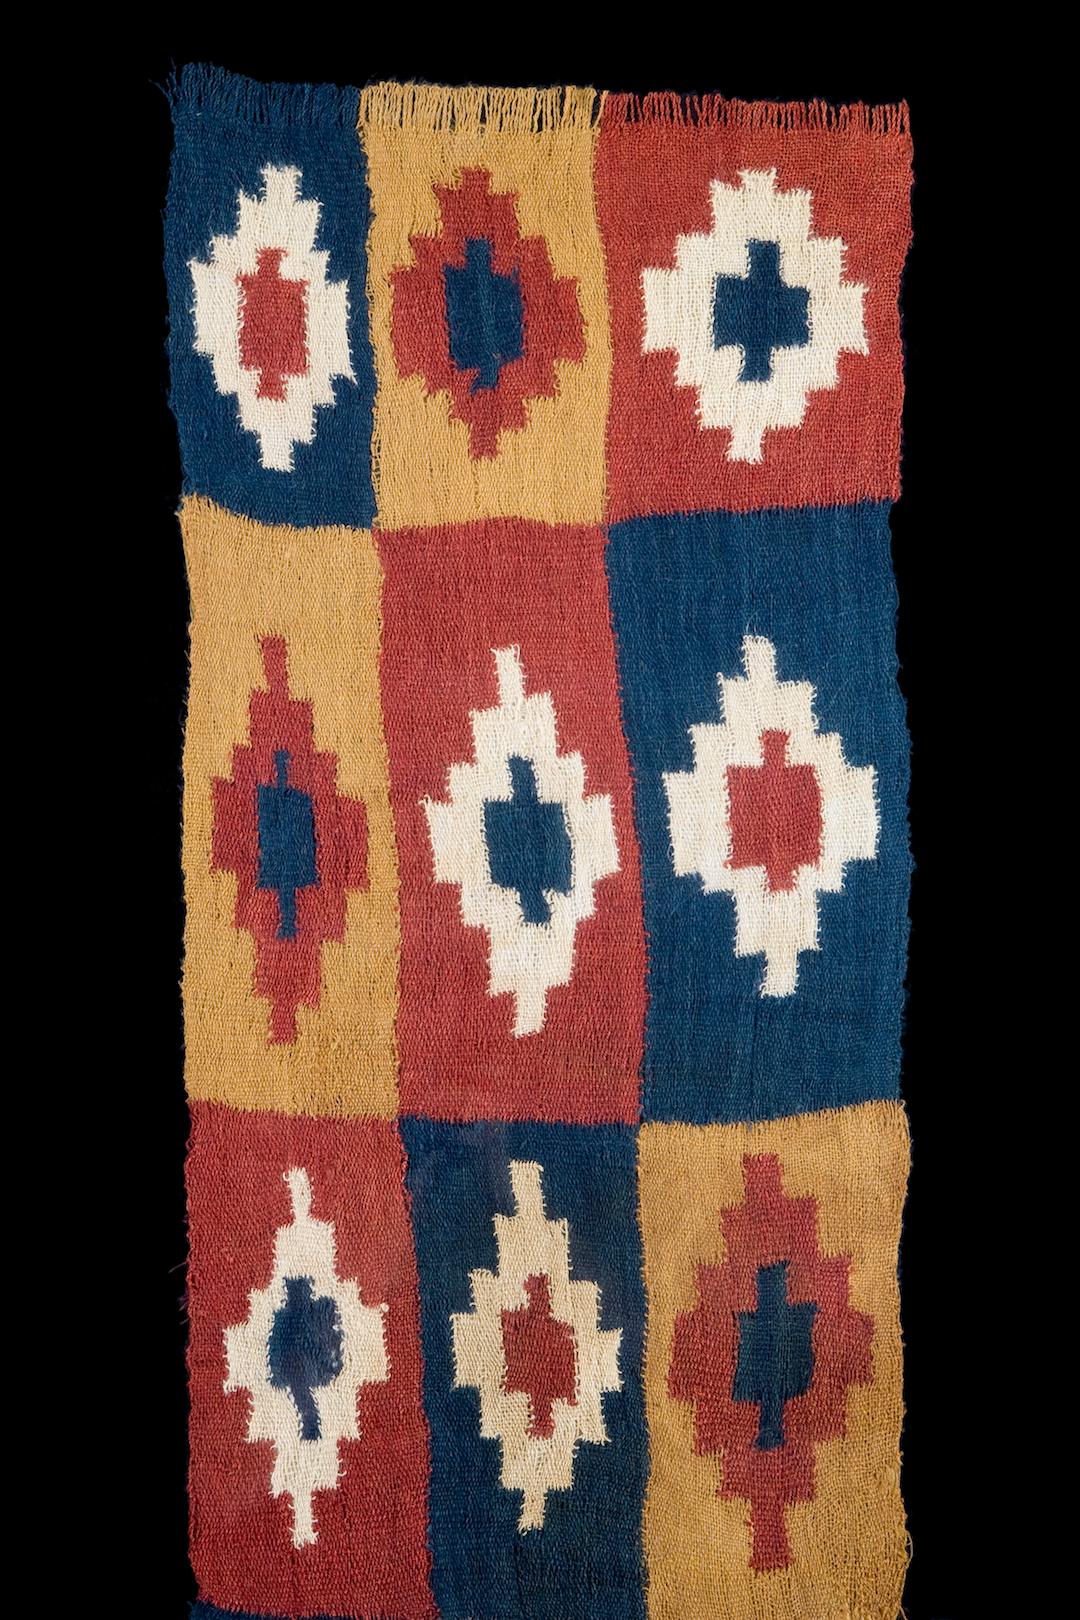 Complete Pre-Columbian Textile panel woven in plain weave with interlocking and alternating squares in bright shades, with elongated stepped diamonds, looped fringe on the short ends.

Nazca, Peru
300-600 AD

Ex-Sotheby's